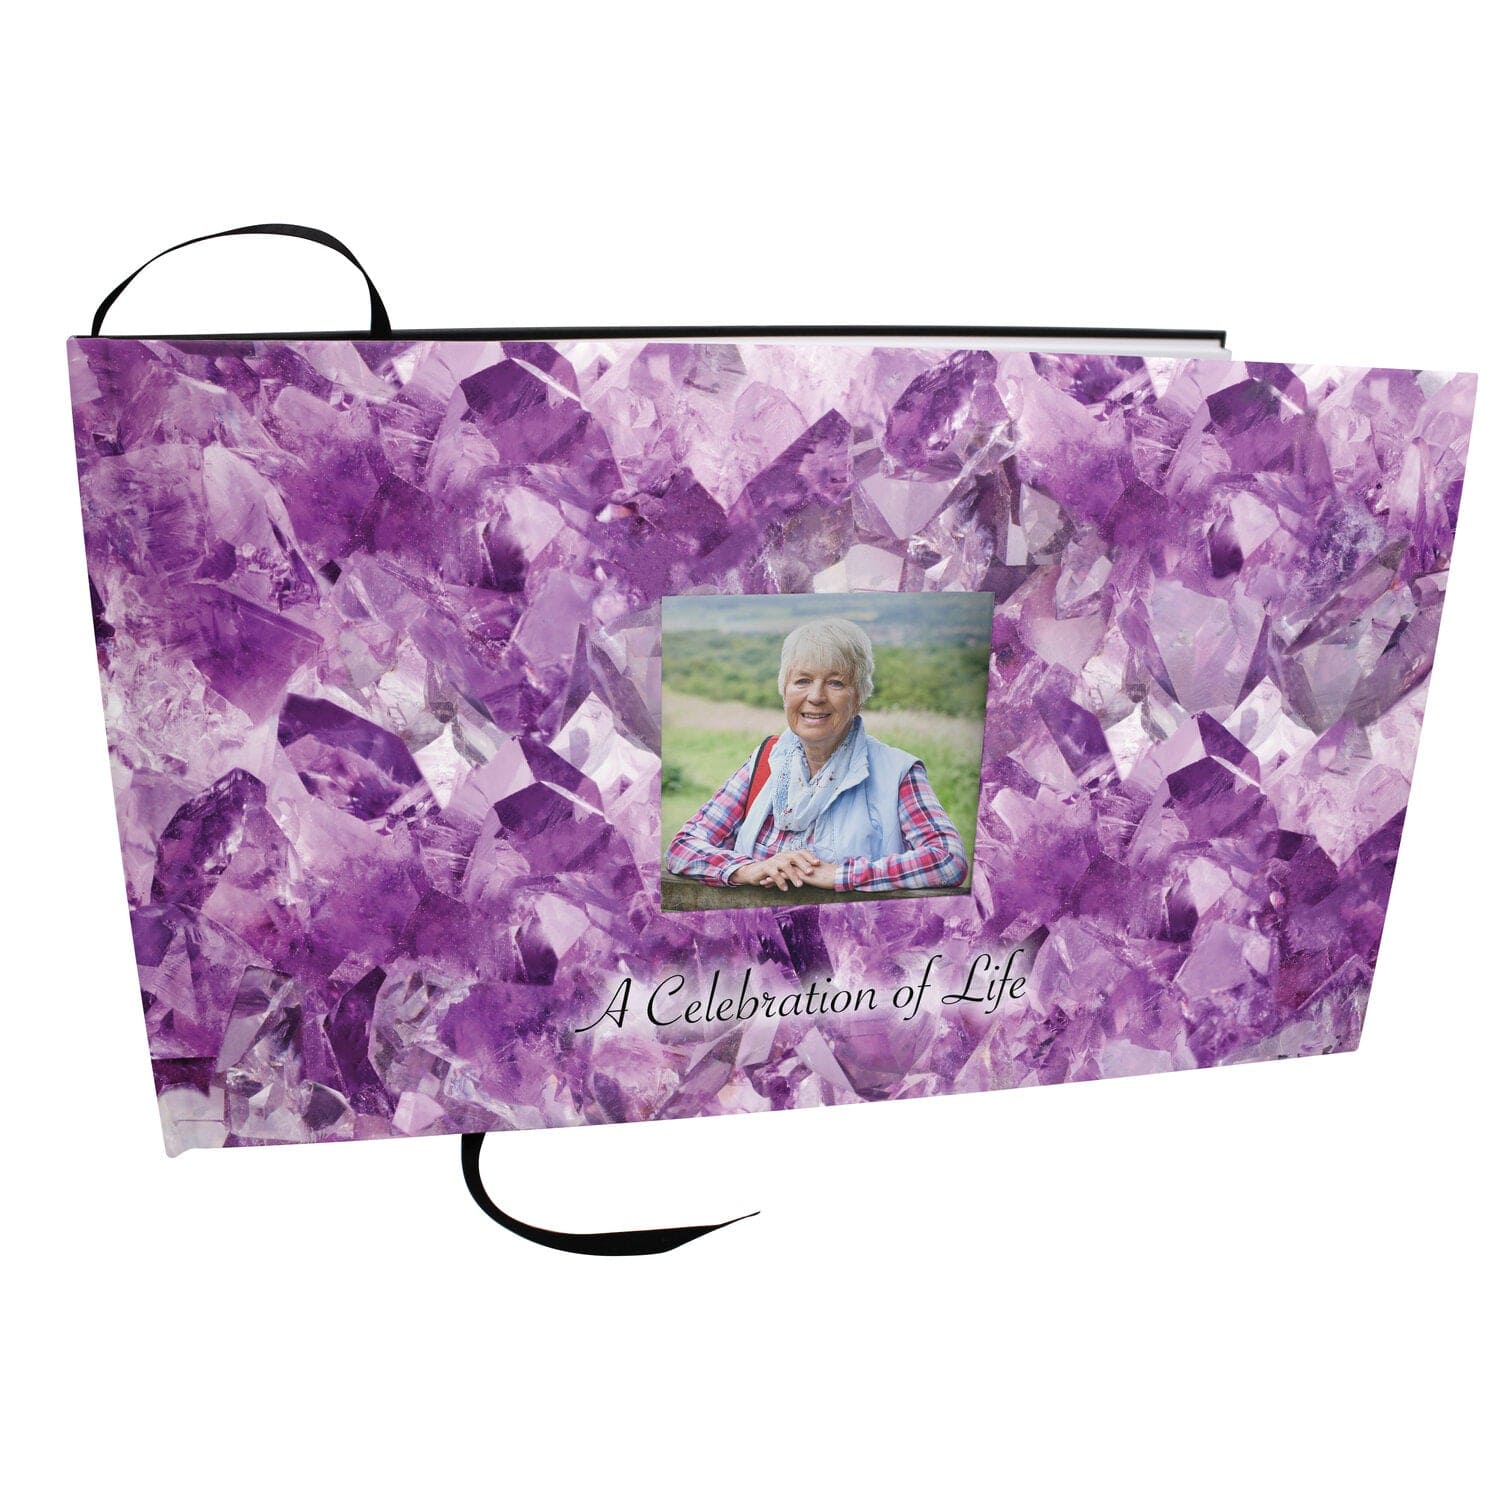 Commemorative Cremation Urns Amethyst Crystals Matching Themed 'Celebration of Life' Guest Book for Funeral or Memorial Service